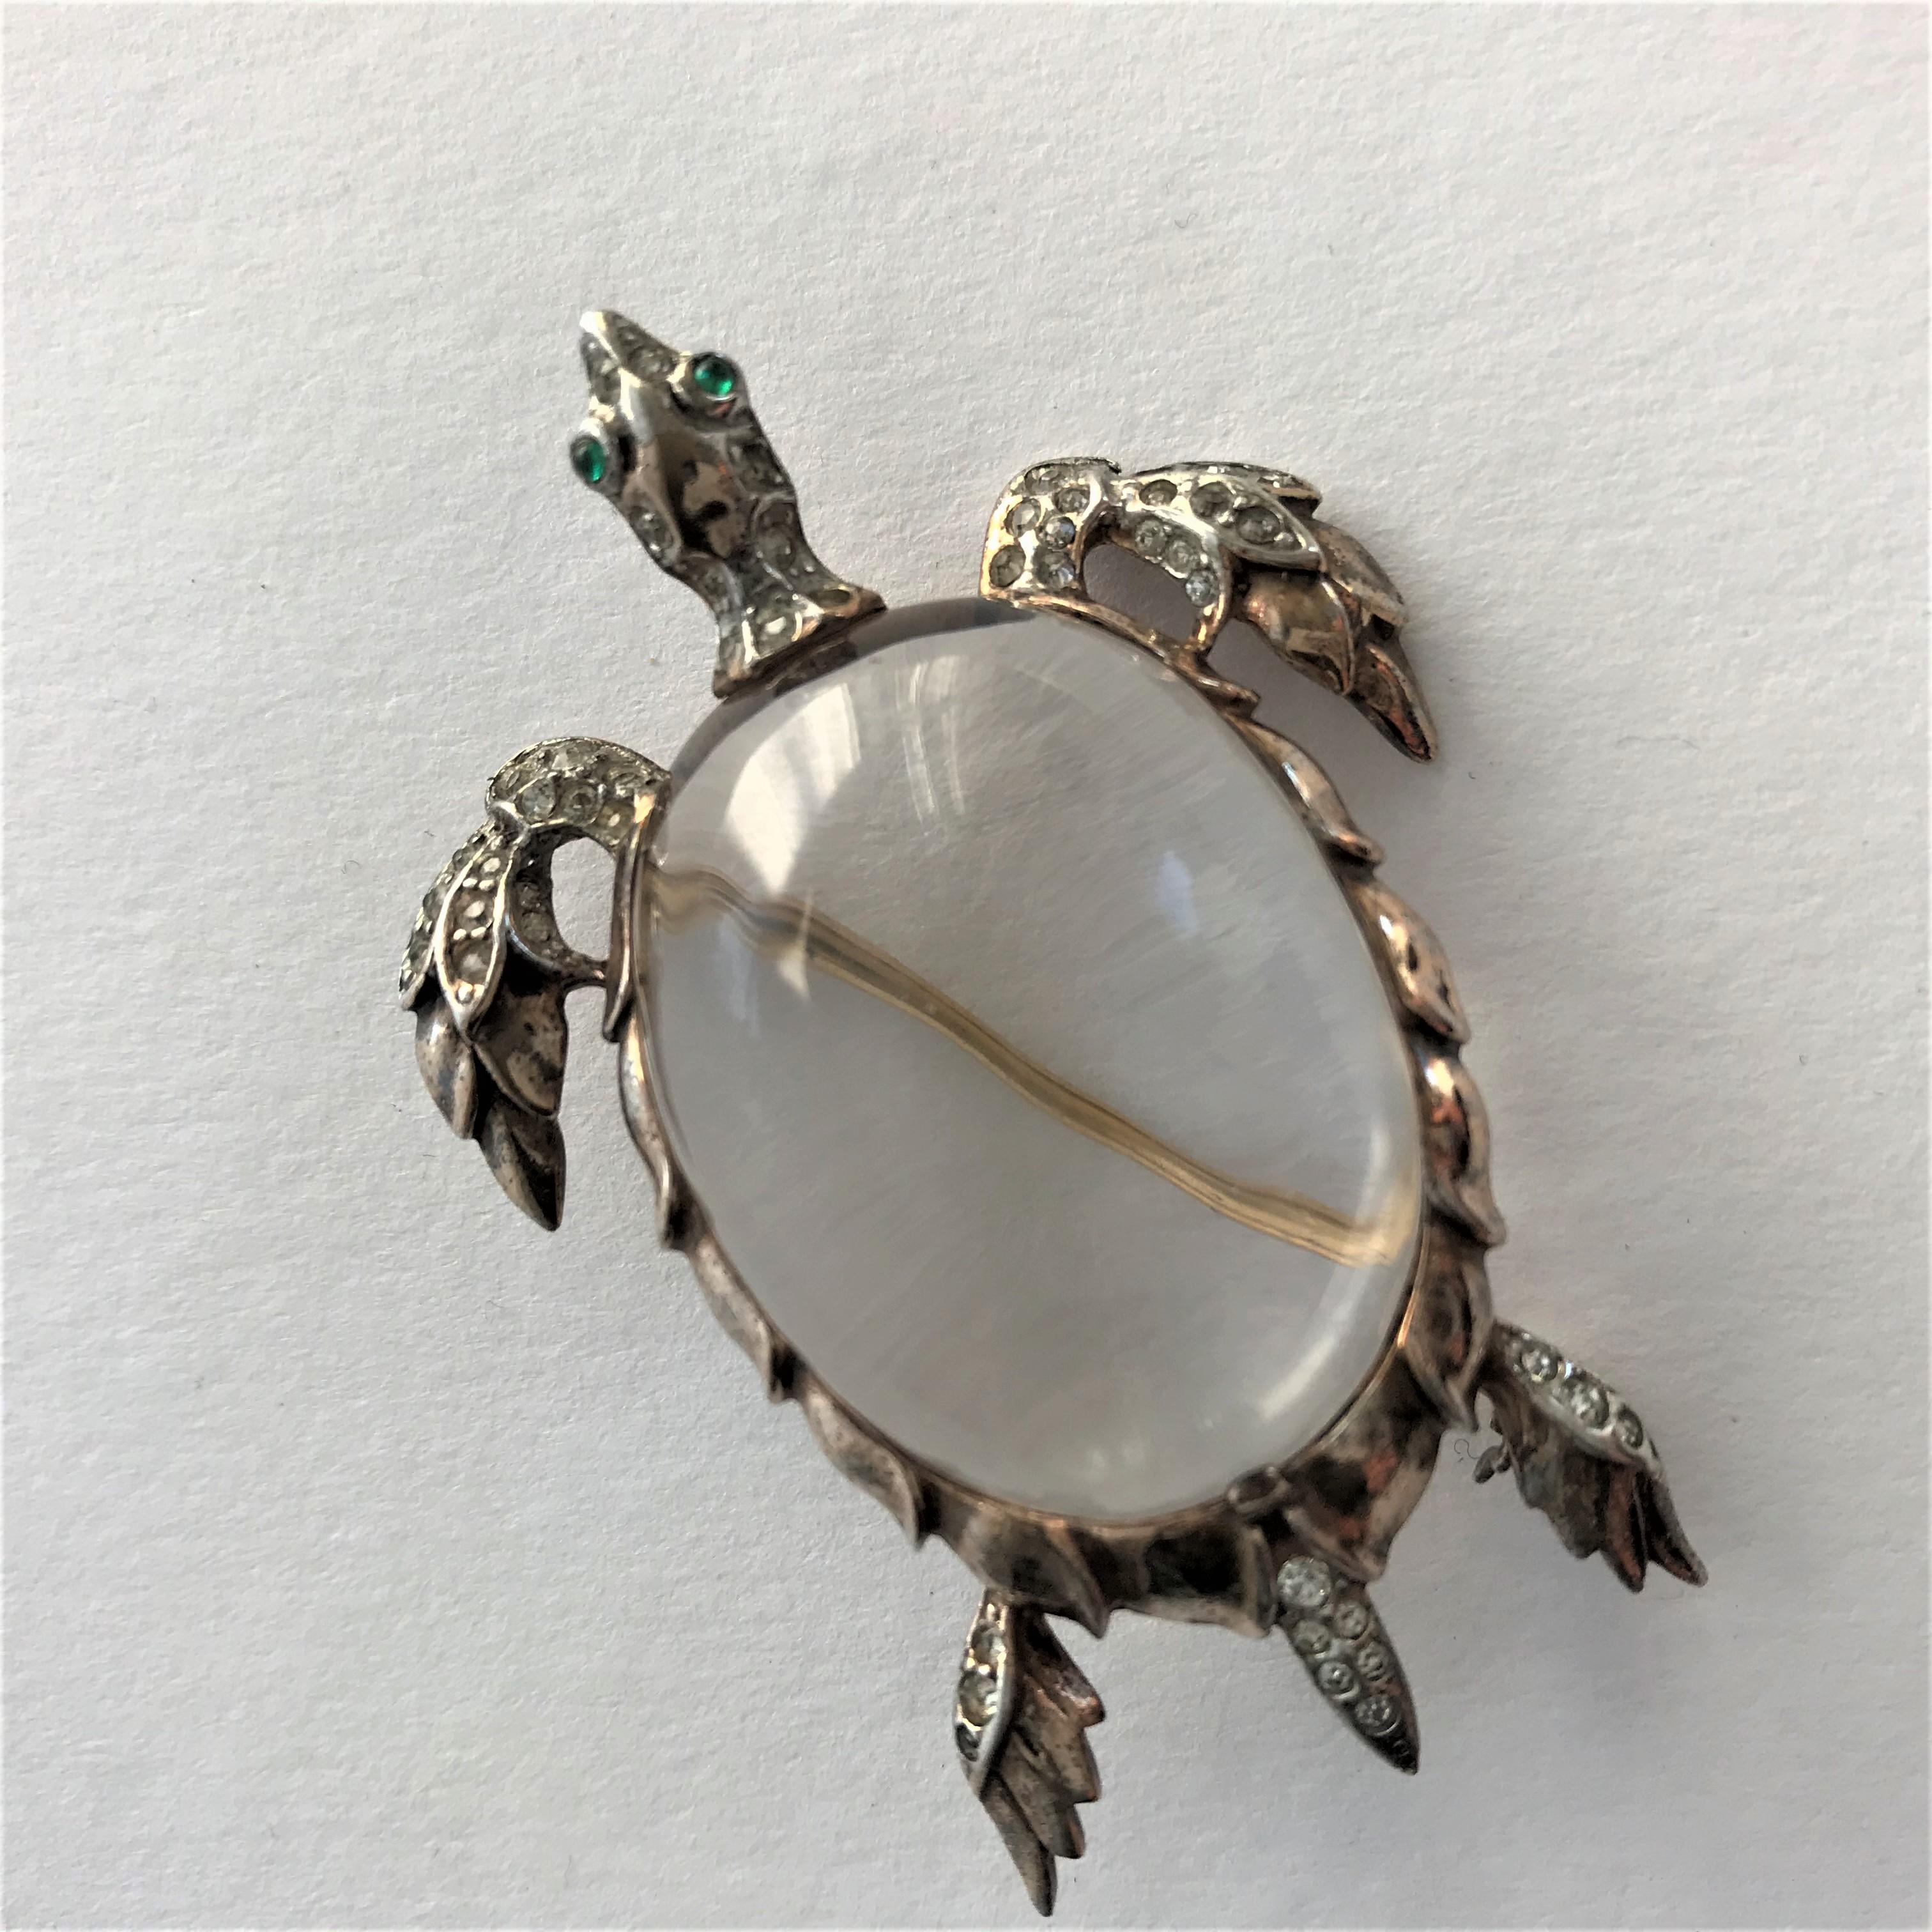 Trifari Jelly  Belly sea turtle brooch crafted of gold plated sterling silver. Embellishments include a large clear Lucite cabochon, called a jelly belly by collectors, with clear rhinestone accents.  Marked Trifari Sterling with a design patent